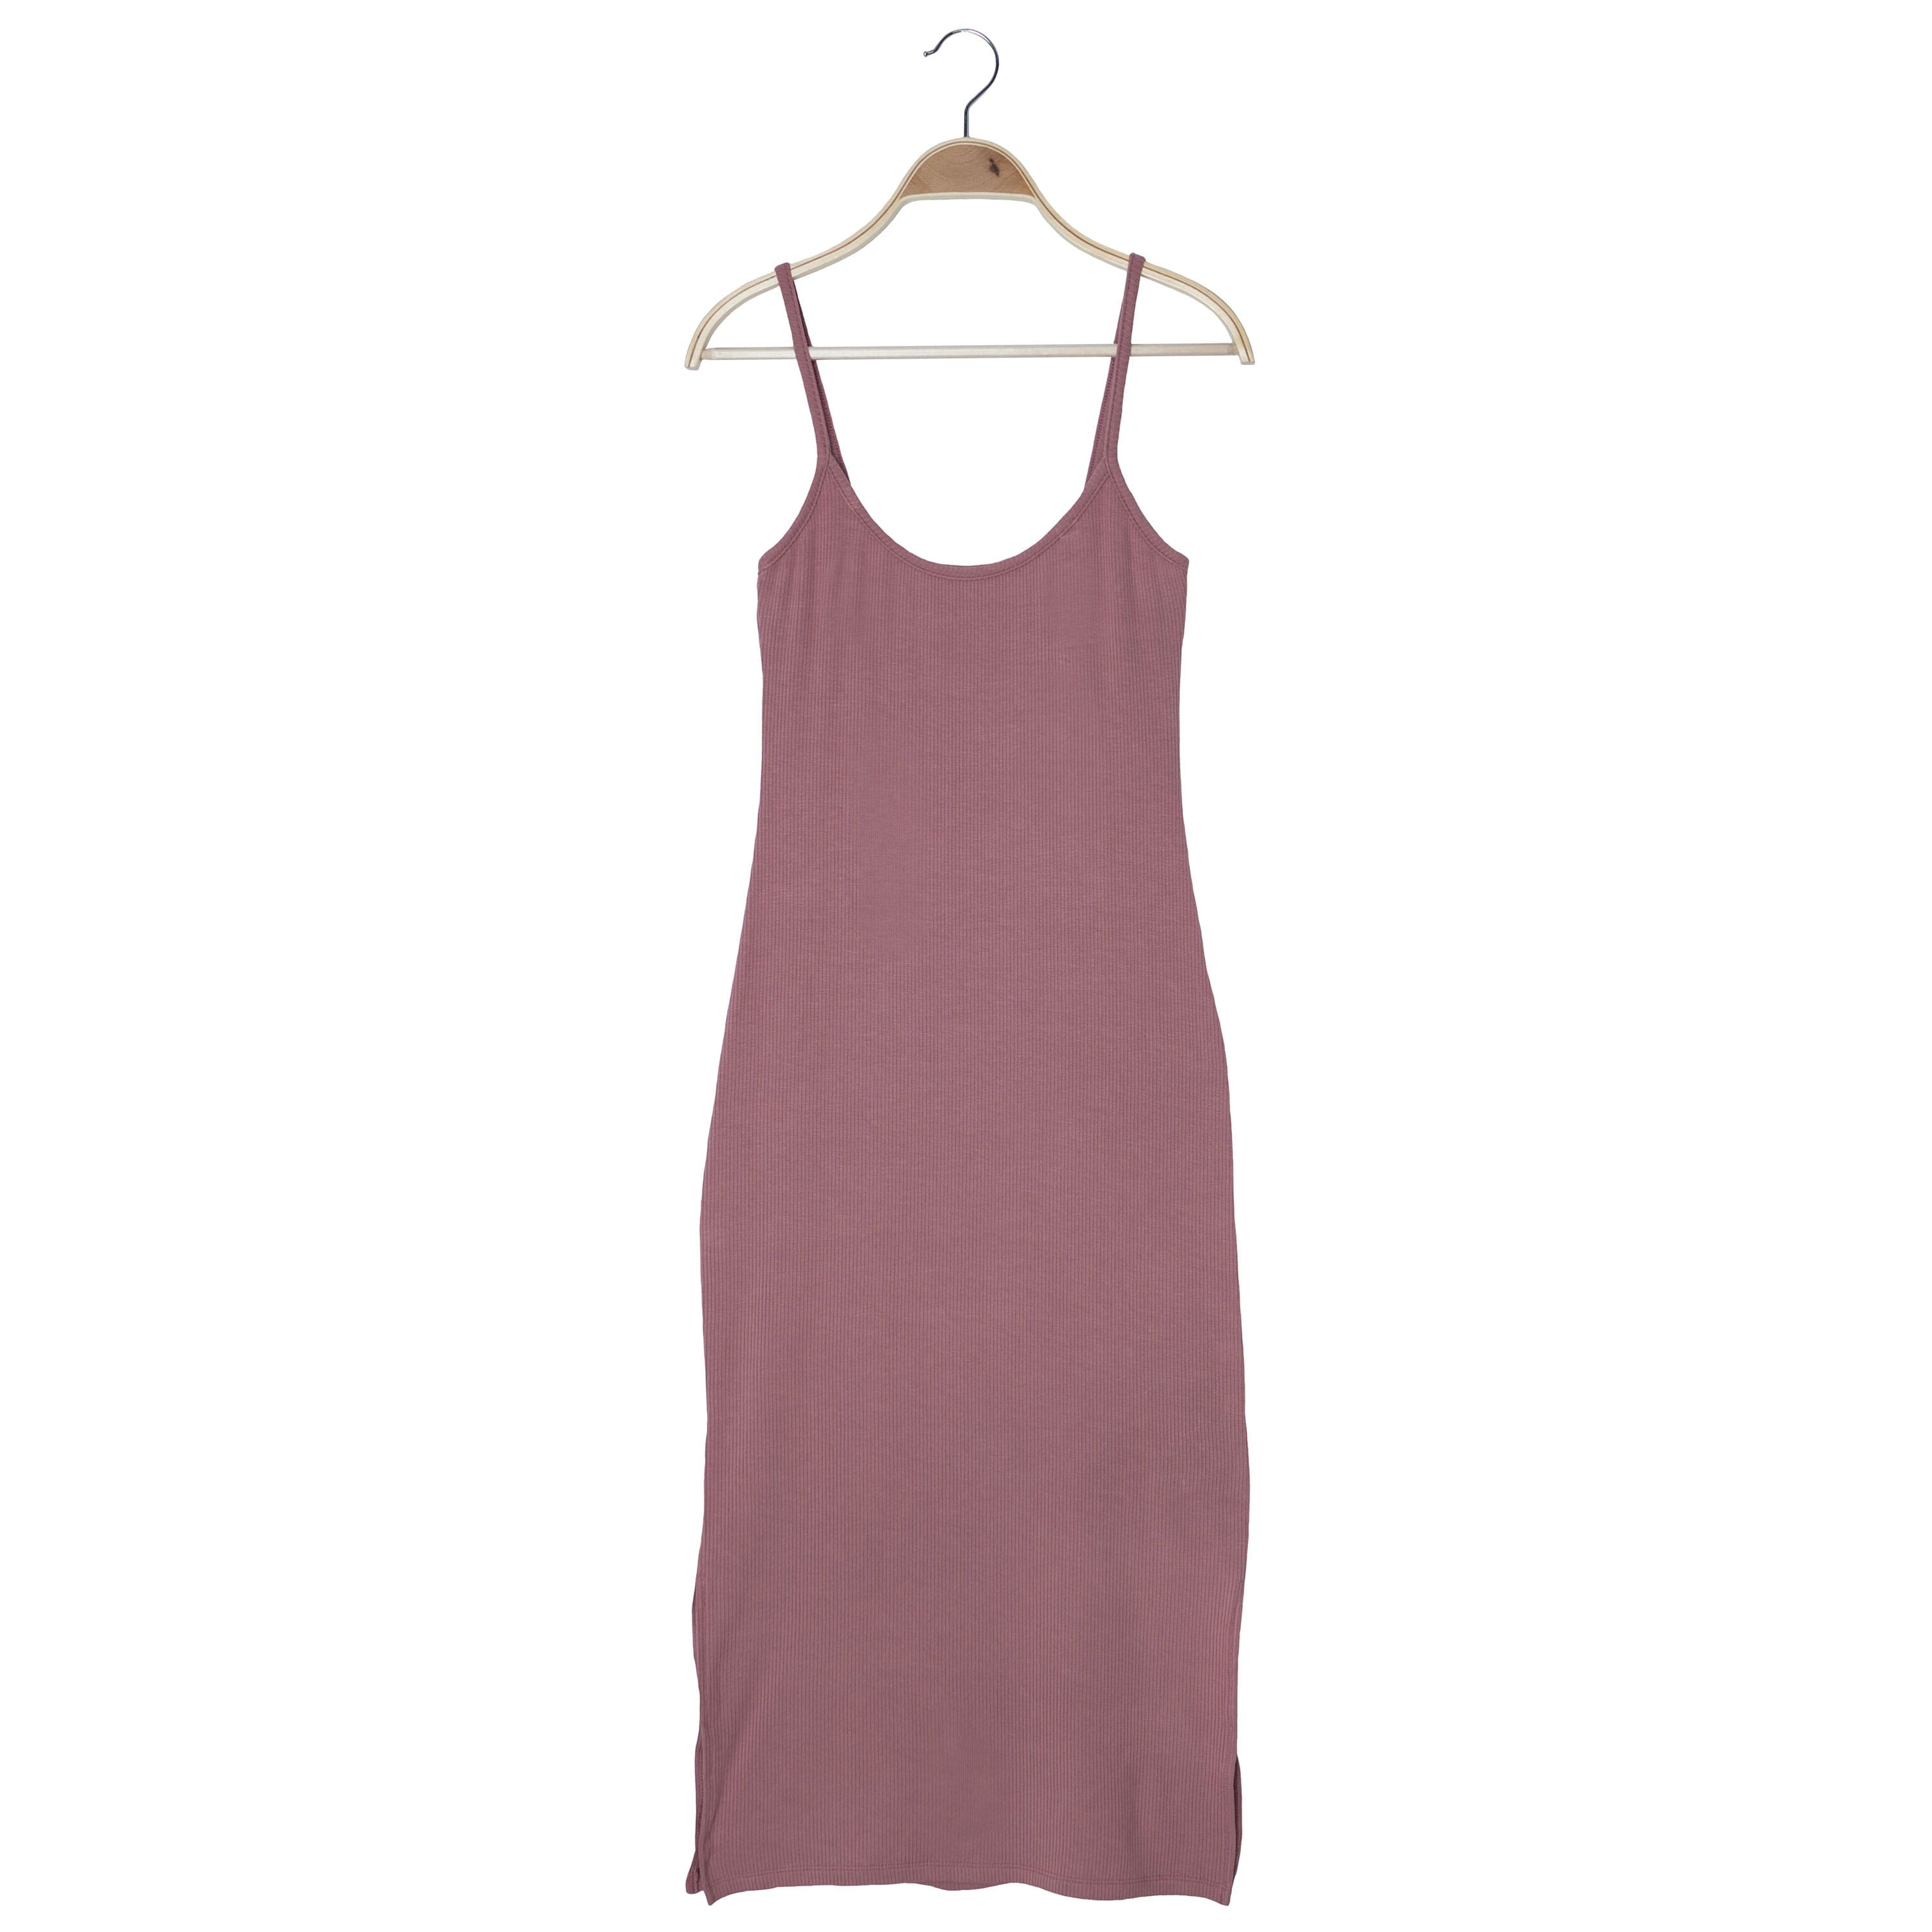 Kyte Baby Ribbed Women's Cami Dress Women's Ribbed Cami Dress in Dusty Rose